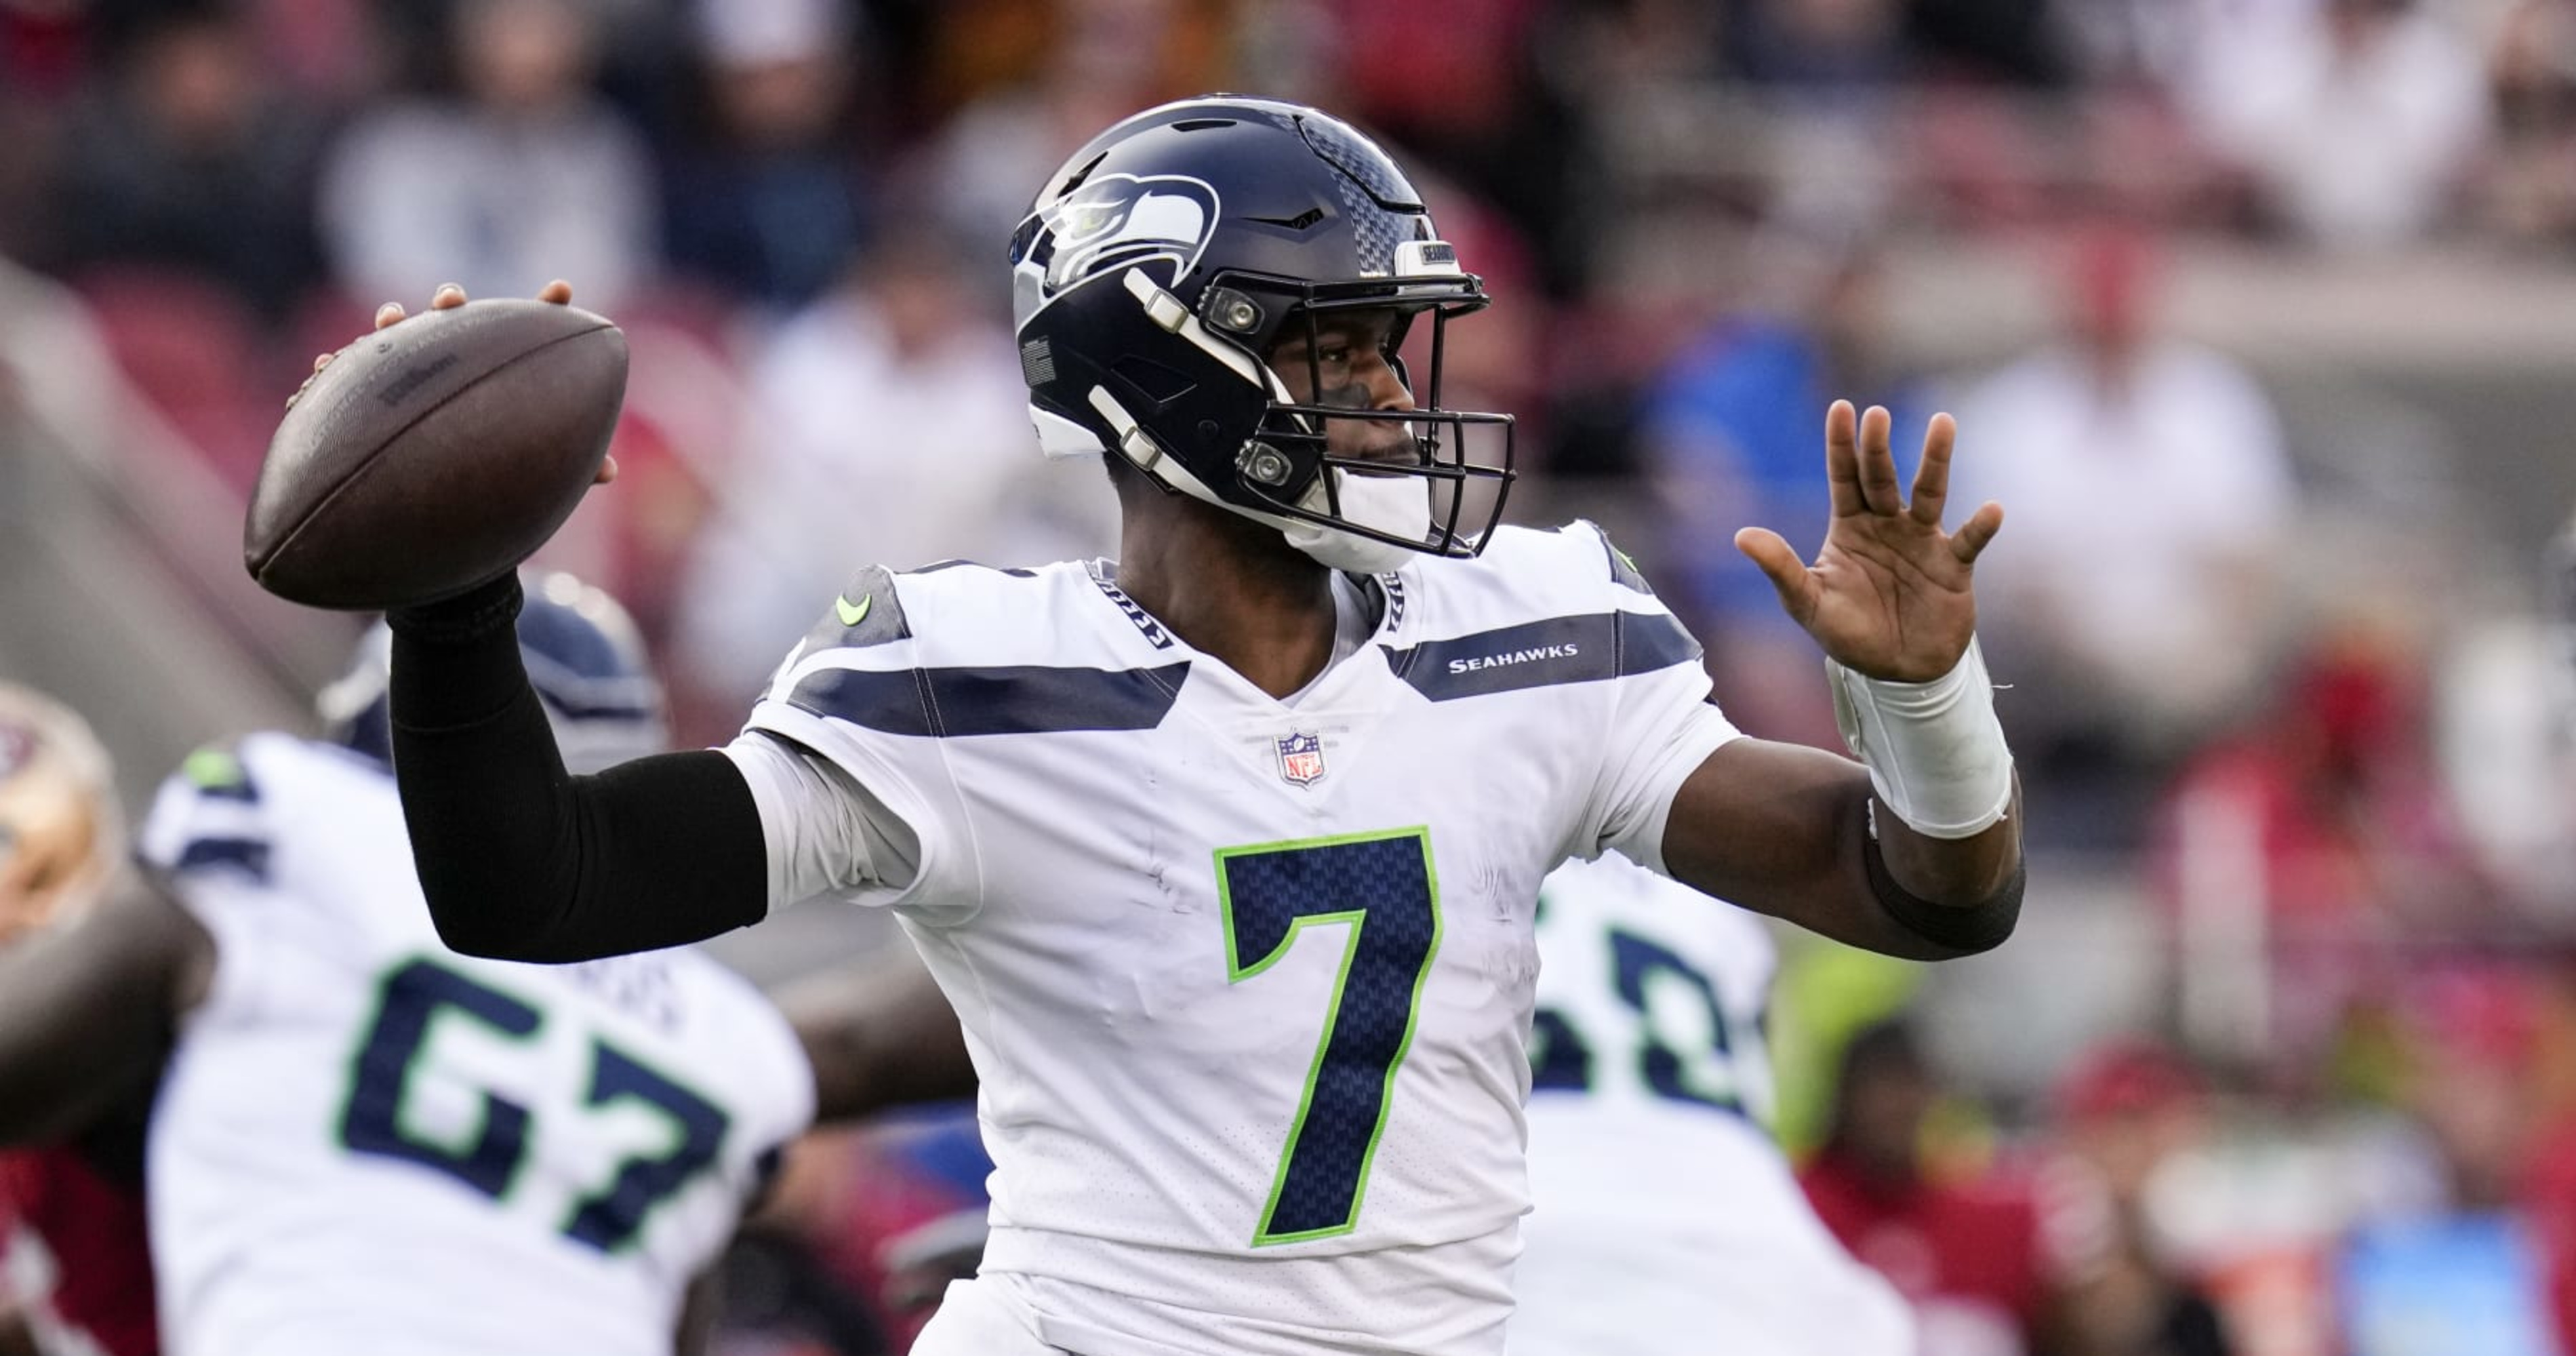 Seahawks QB Geno Smith ranks among top 10 in QBR after three games